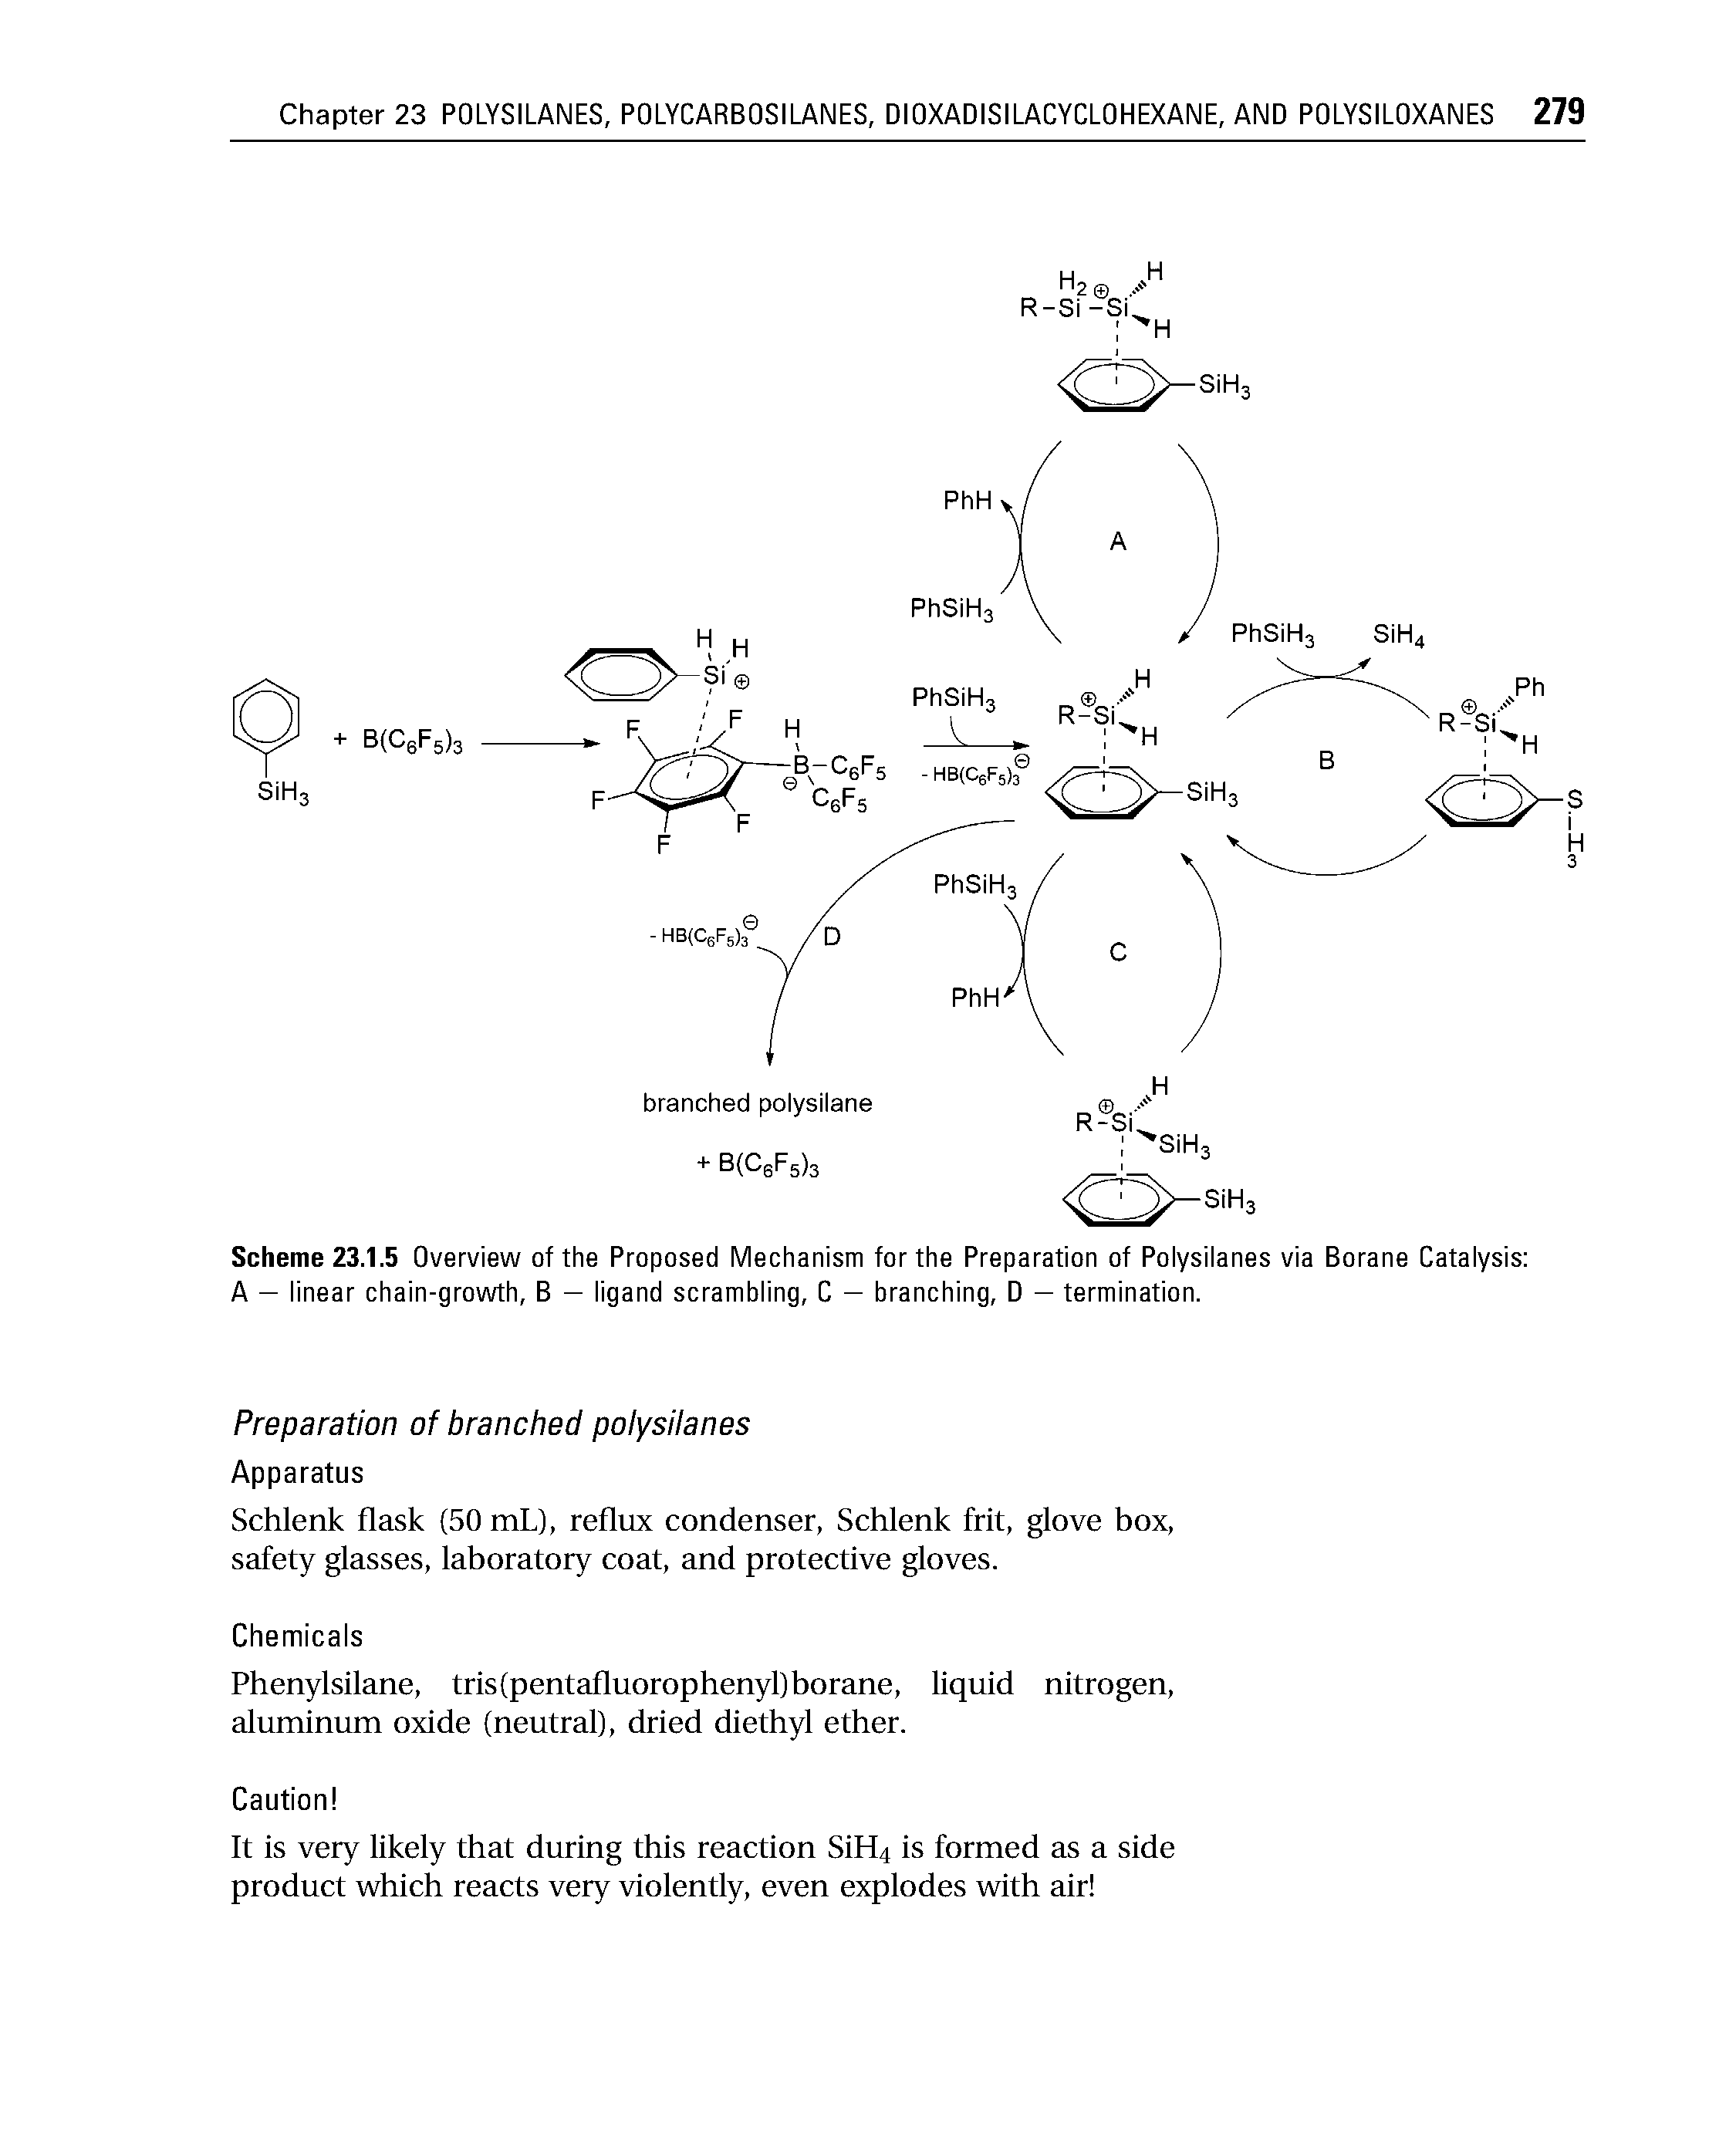 Scheme 23.1.5 Overview of the Proposed Mechanism for the Preparation of Polysilanes via Borane Catalysis A — linear chain-growth, B — ligand scrambling, C — branching, D — termination.